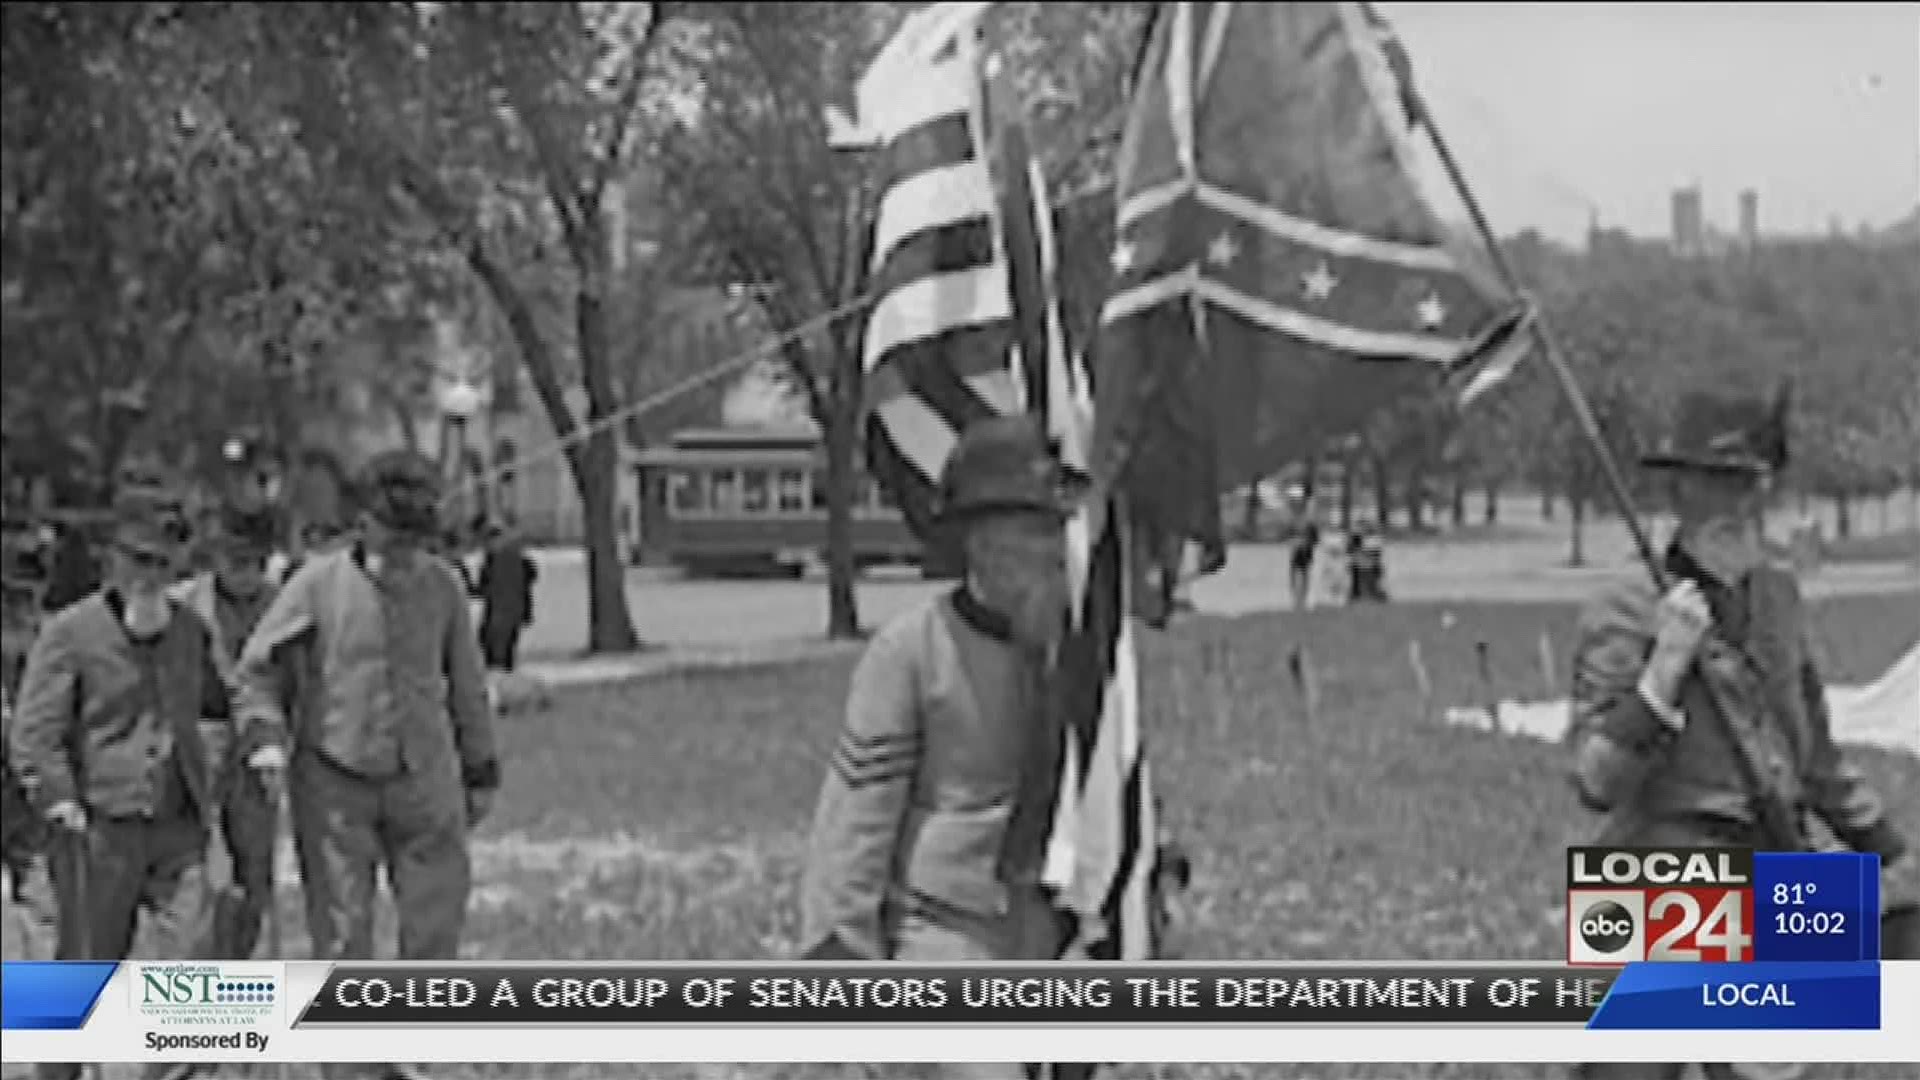 Governor Tate Reeves is expected to sign the bill removing the emblem from the flag